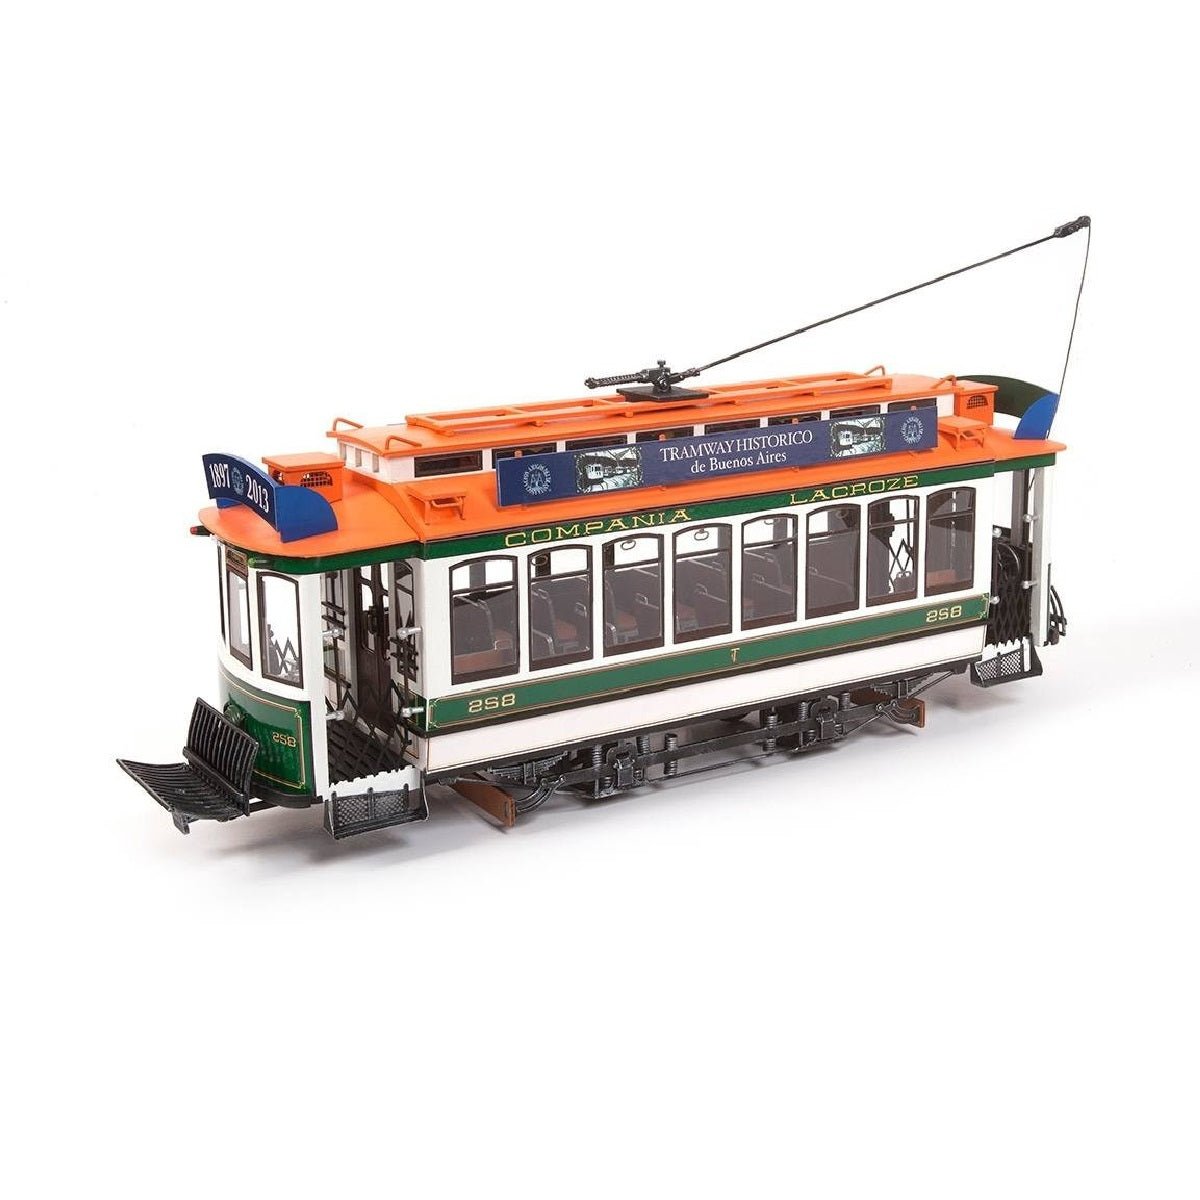 OcCre® Lacroze "Buenos Aires" Tram Model Kit, 1/24 Scale